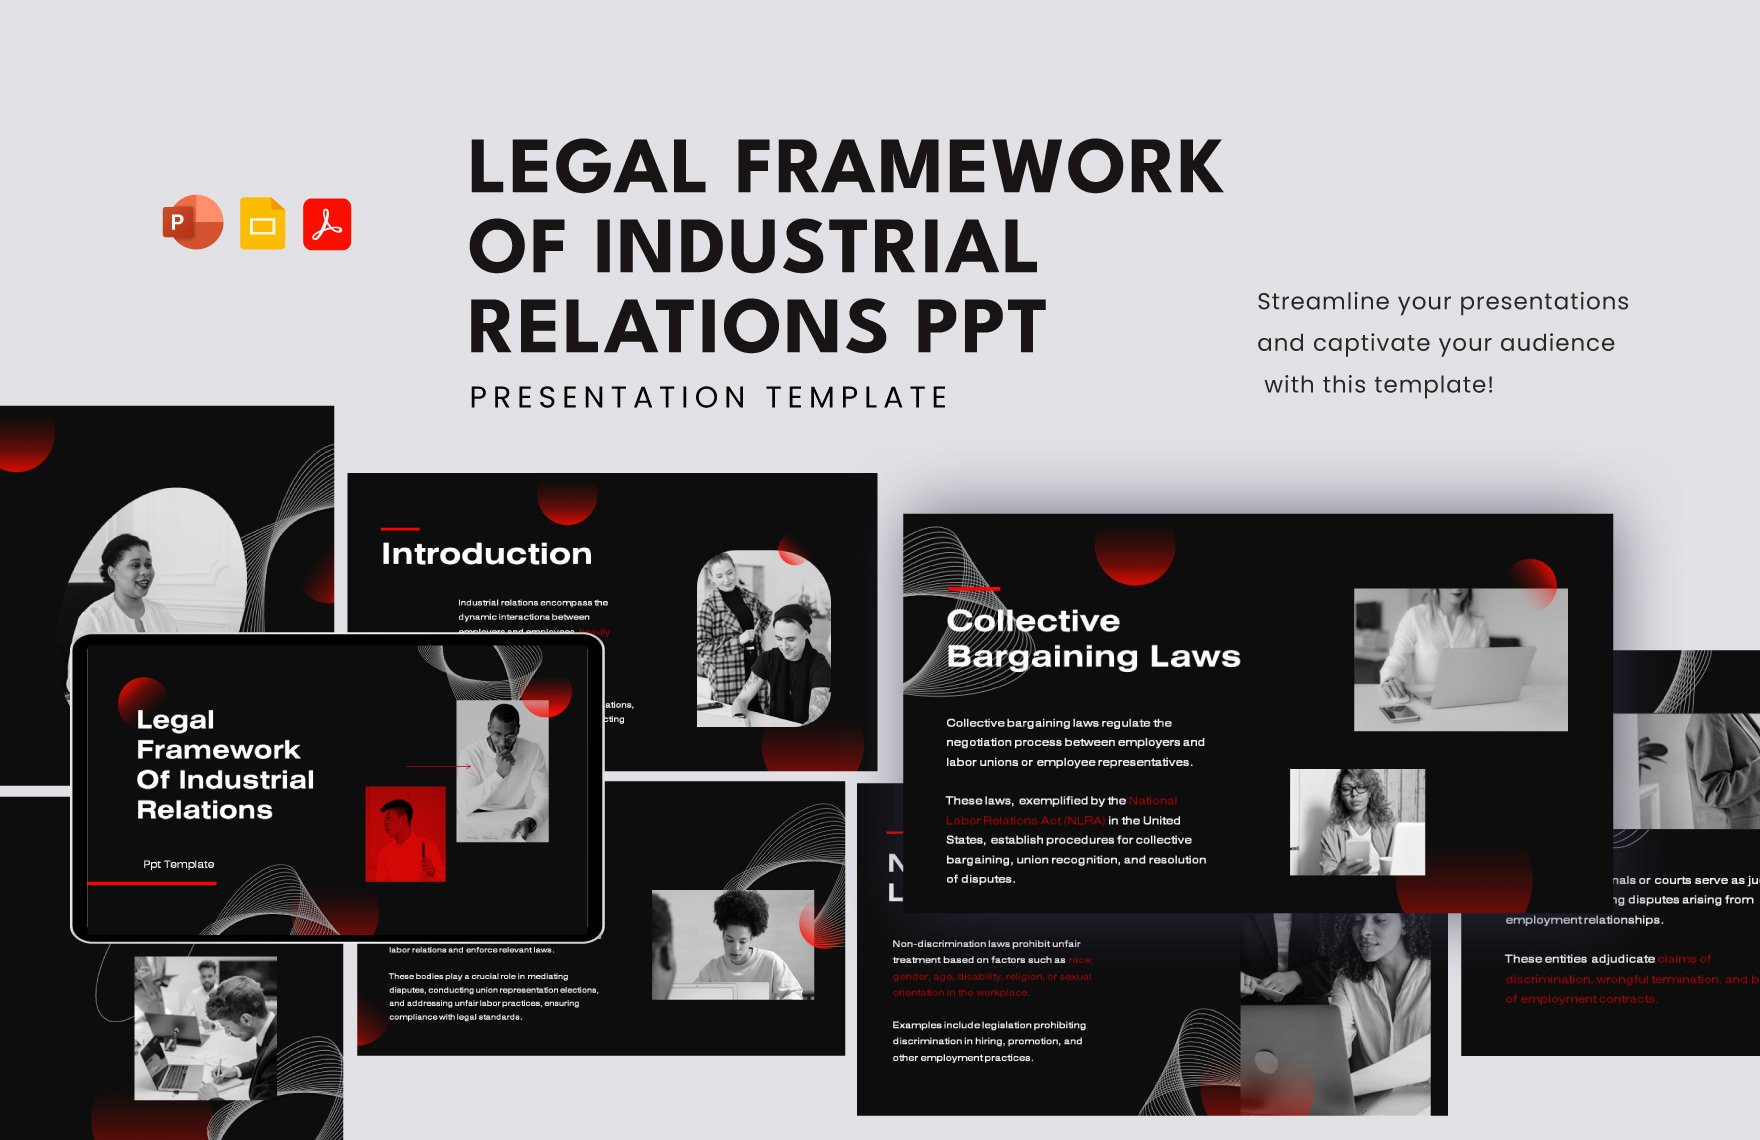 Legal Framework of Industrial Relations PPT Template